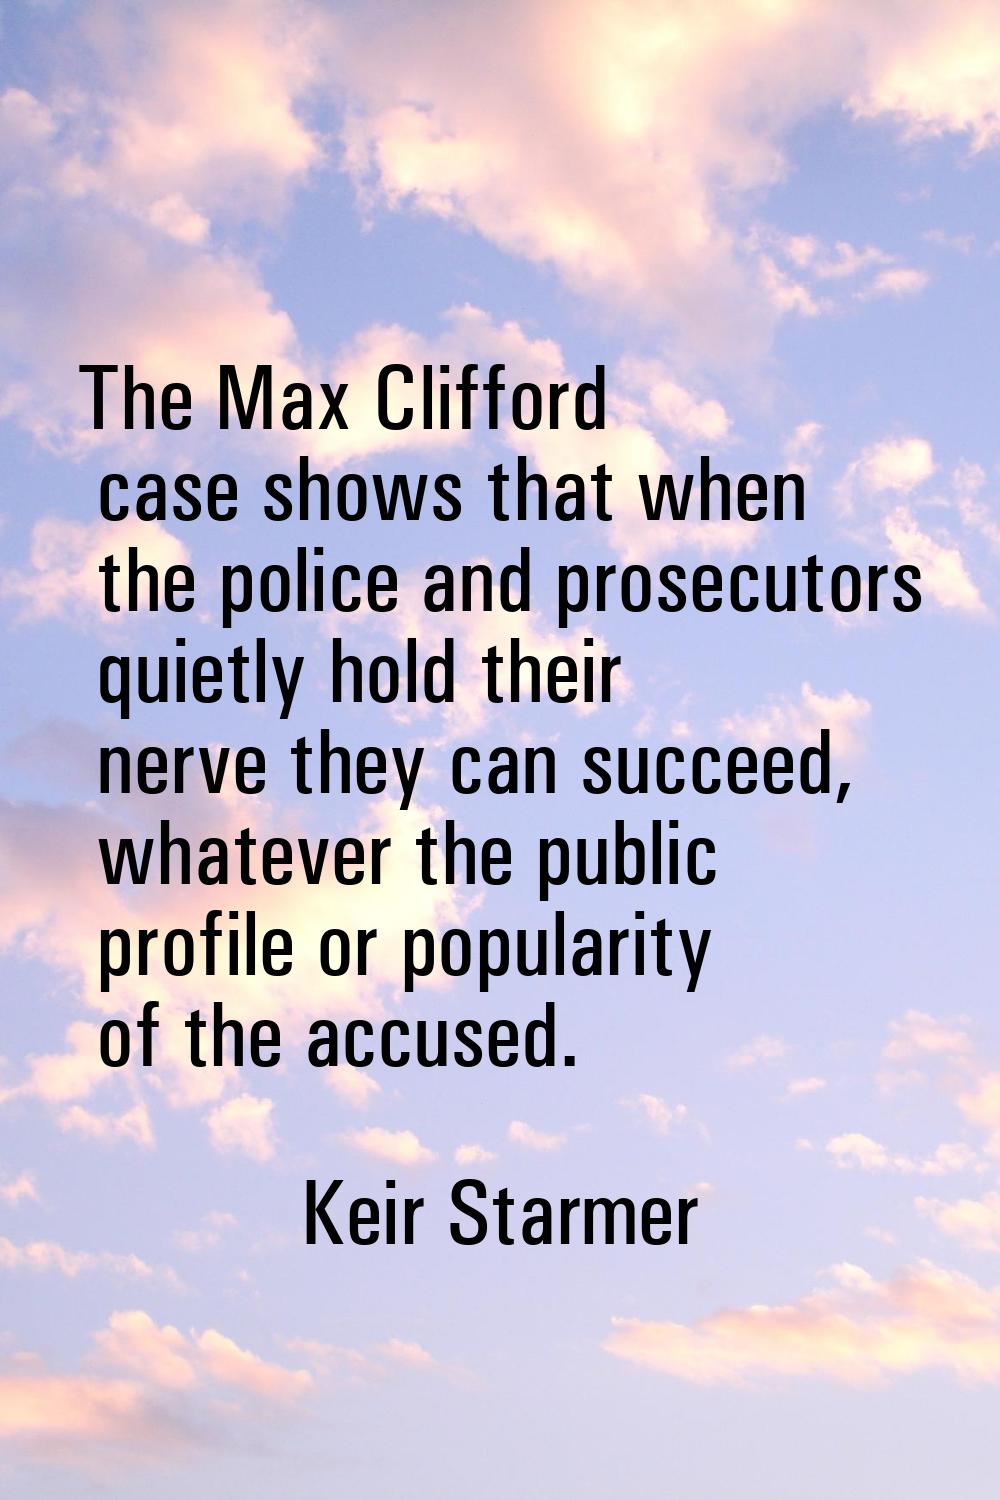 The Max Clifford case shows that when the police and prosecutors quietly hold their nerve they can 